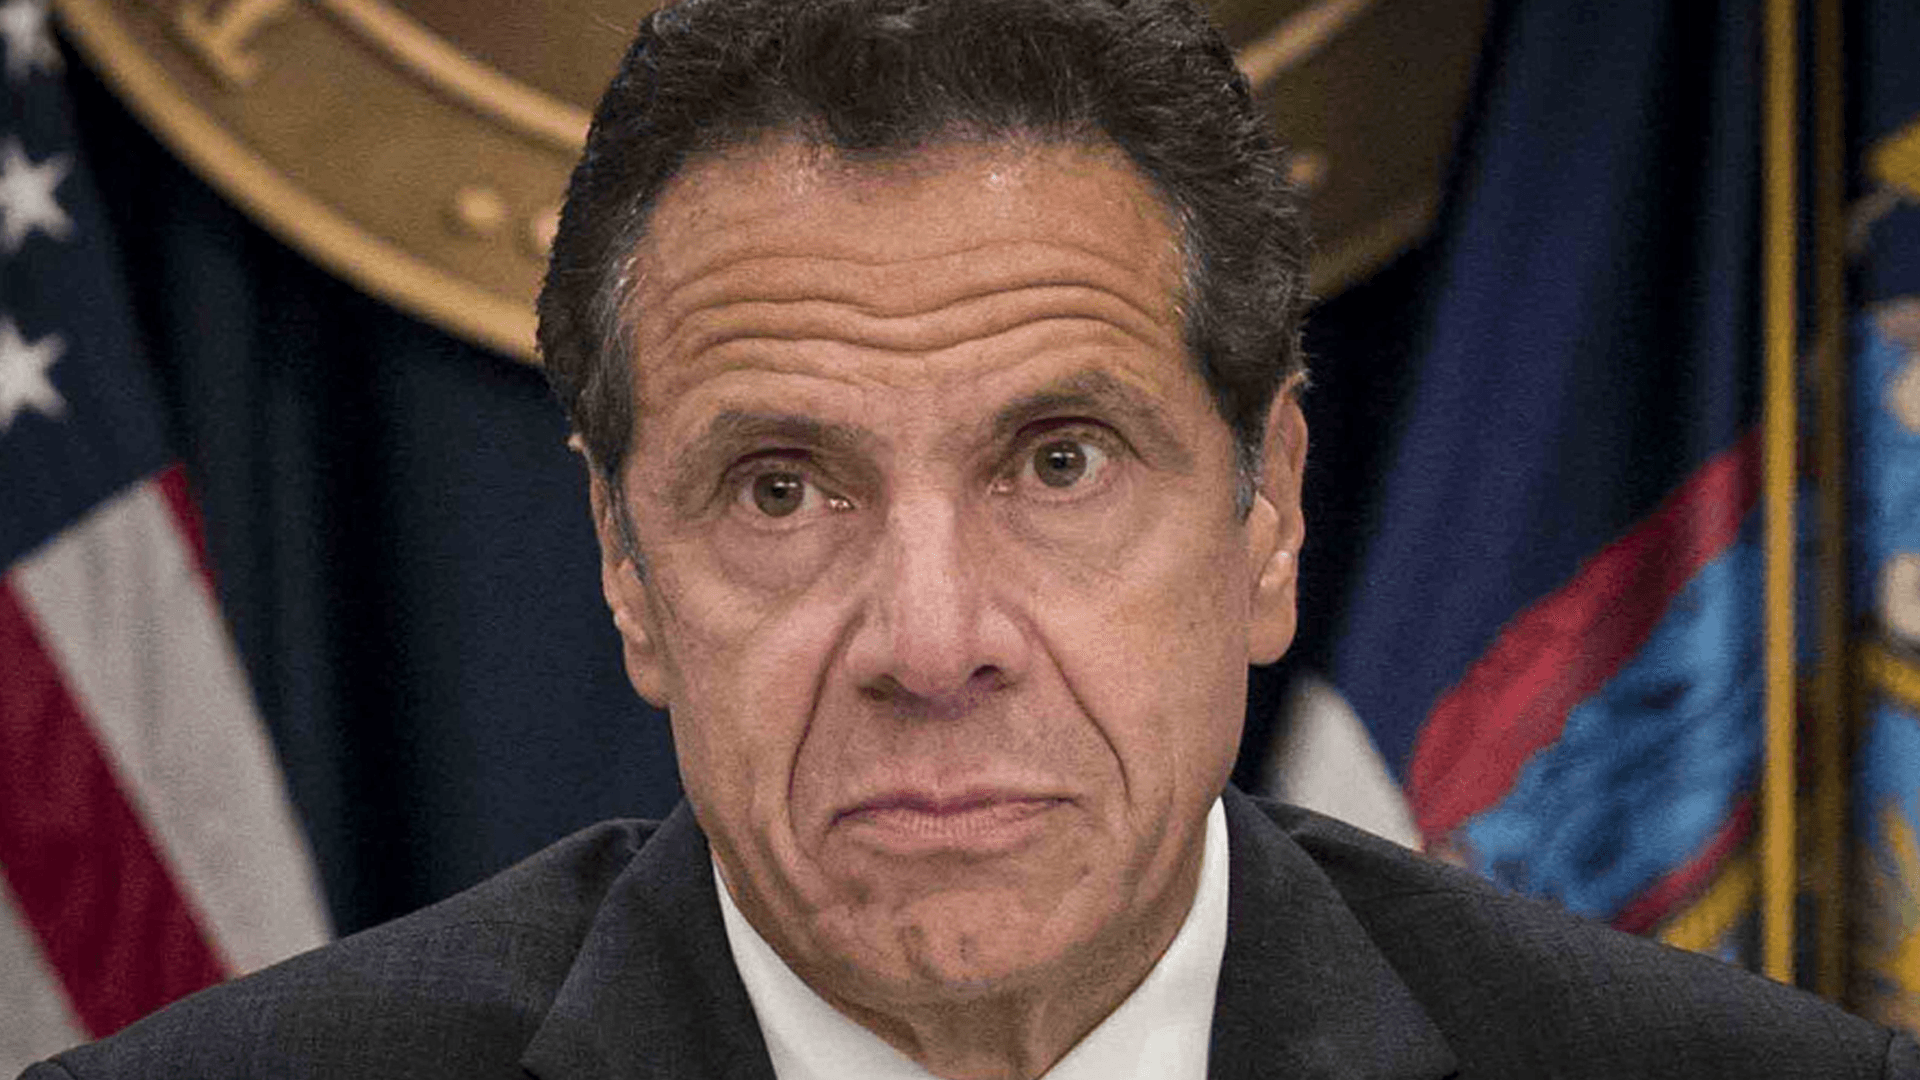 Gov. Andrew Cuomo denies report findings that he sexually harassed ladies